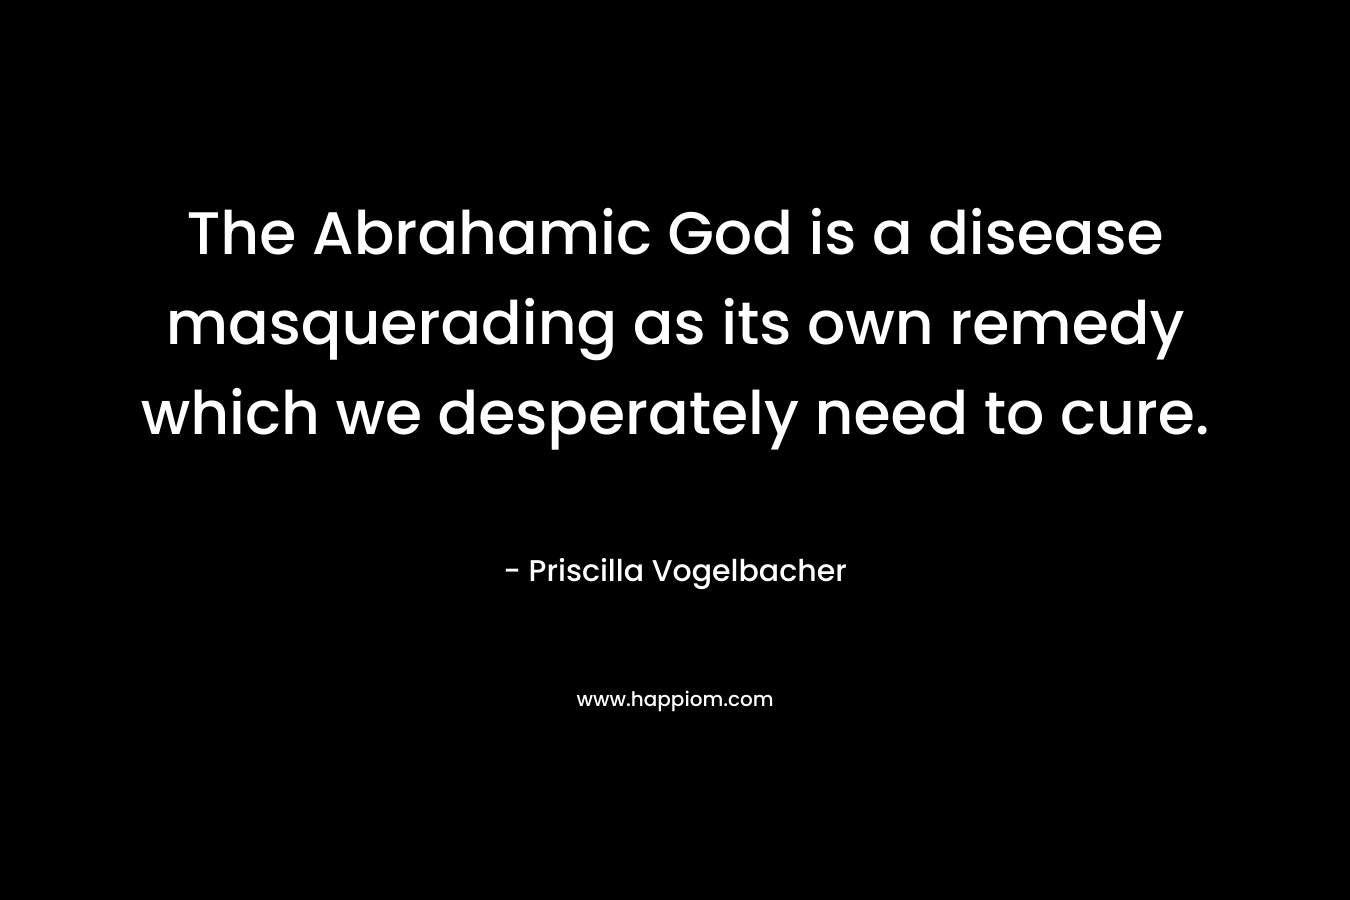 The Abrahamic God is a disease masquerading as its own remedy which we desperately need to cure.